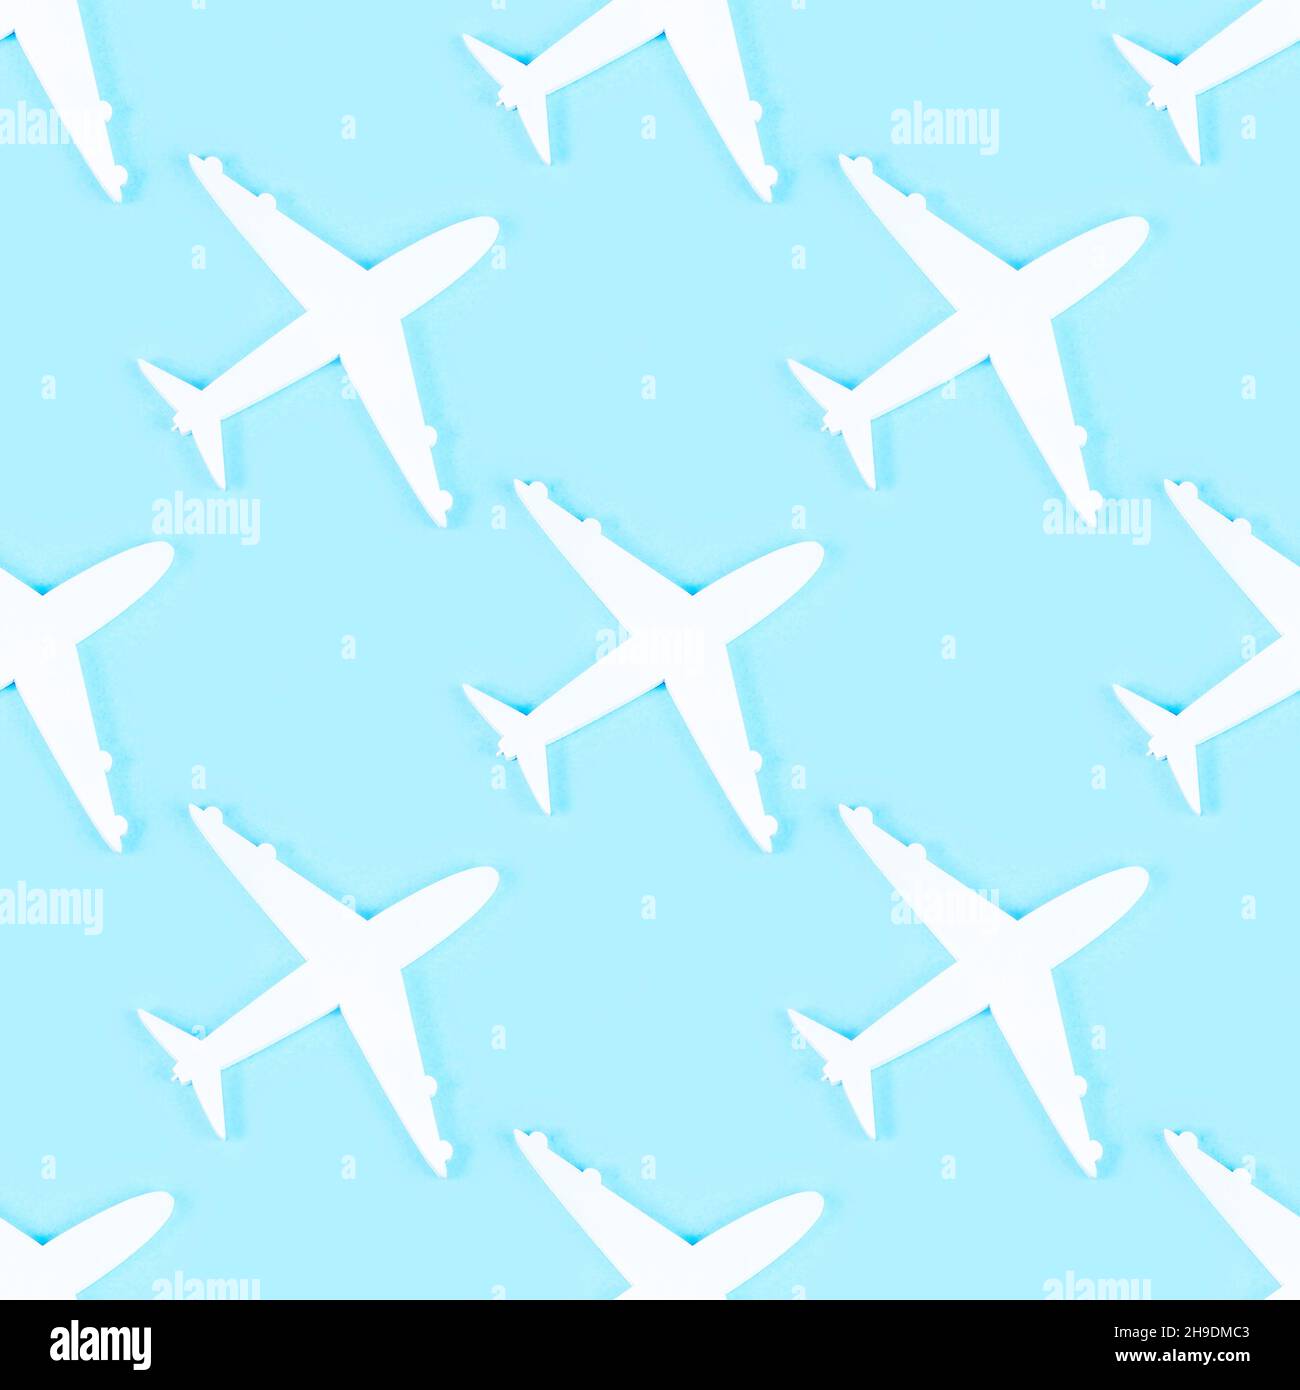 White plane silhouette repeat seamless pattern on light blue background. Stock Photo